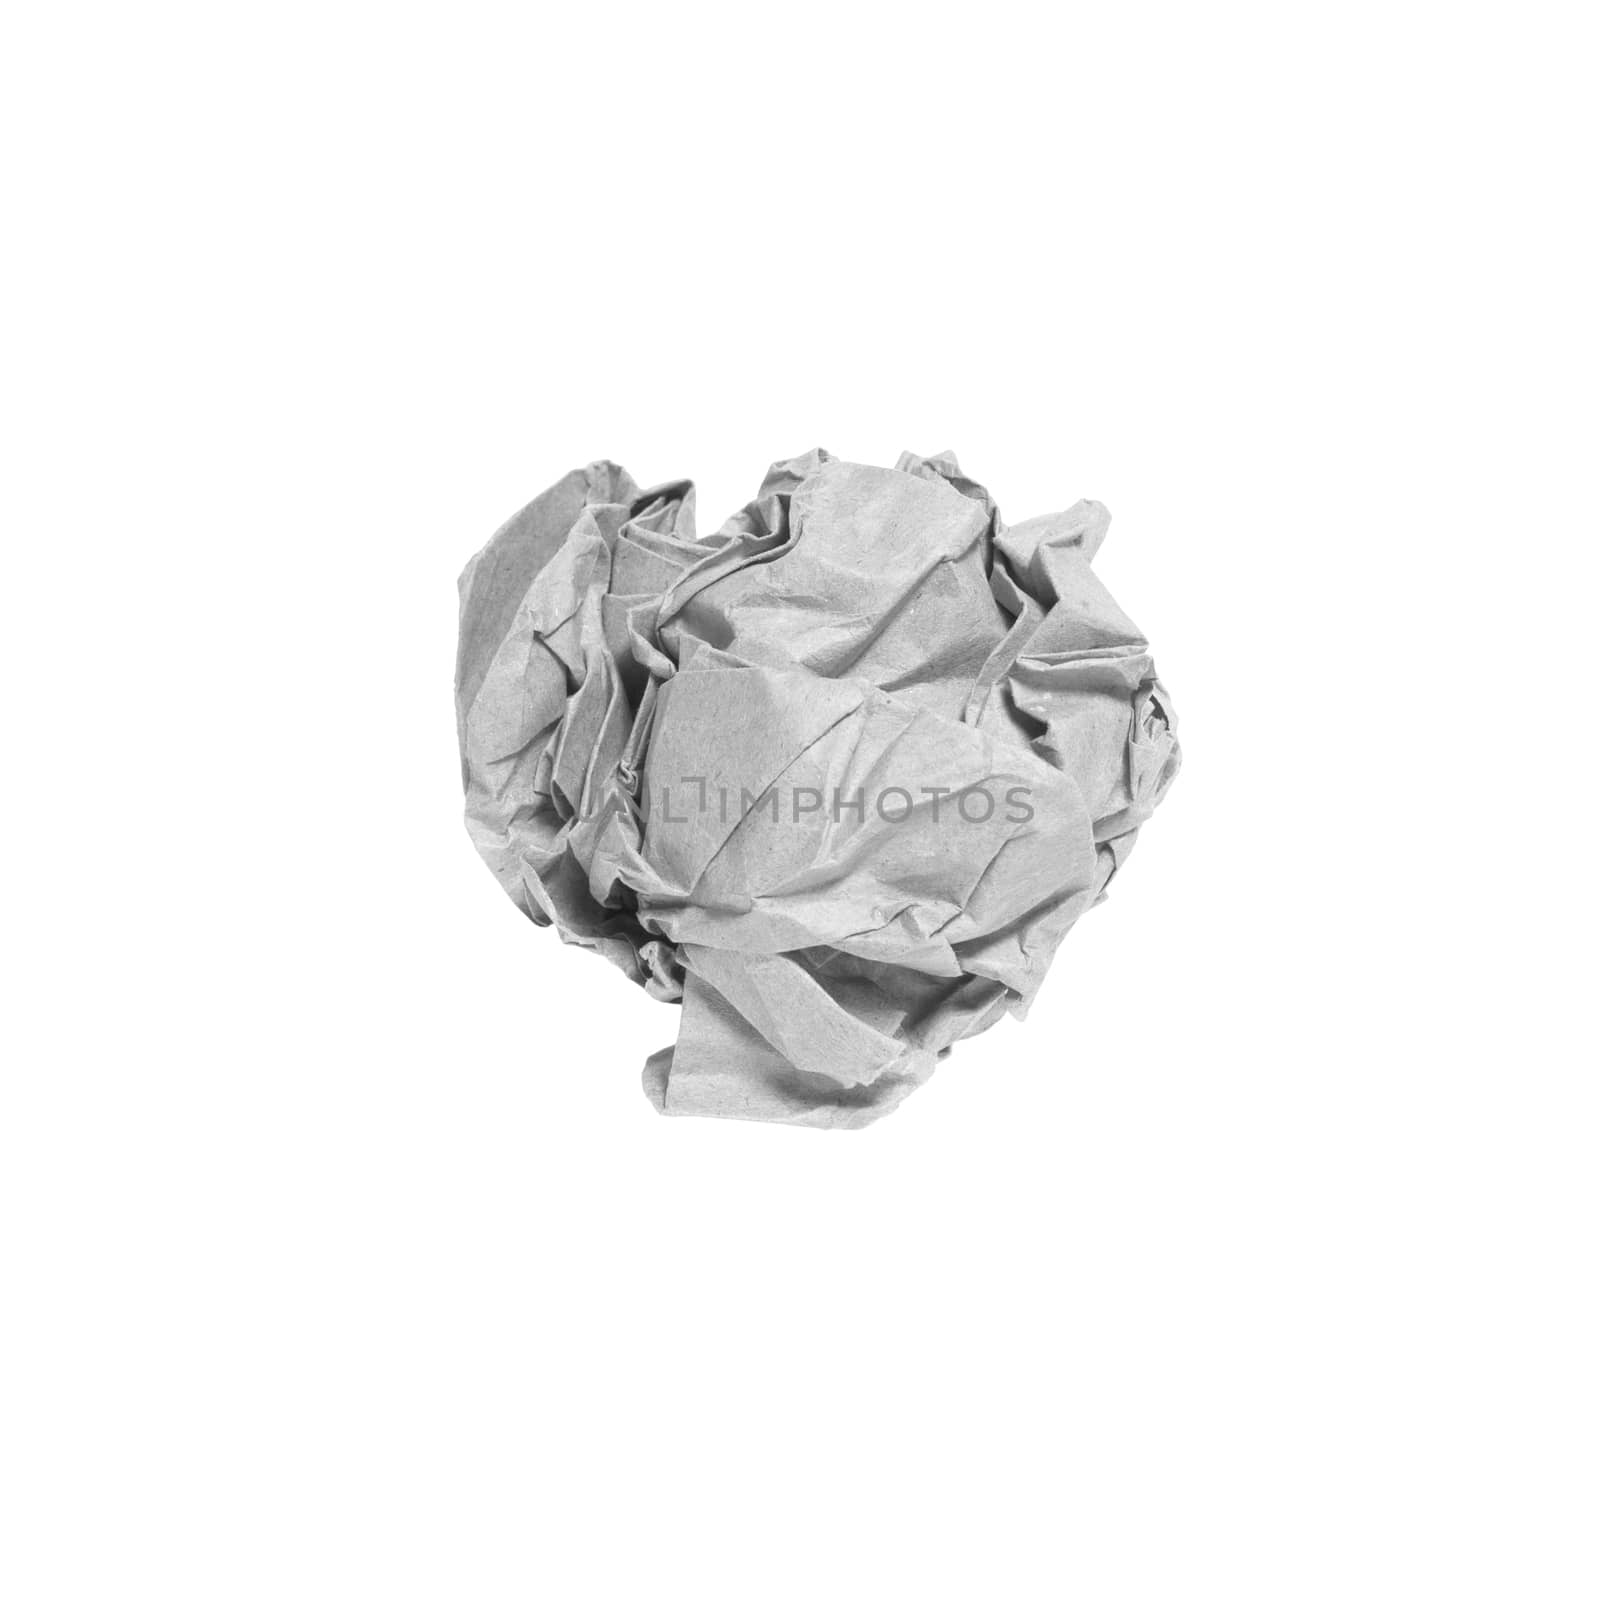 Crumpled gray paper ball isolated over white background. Bluren concept